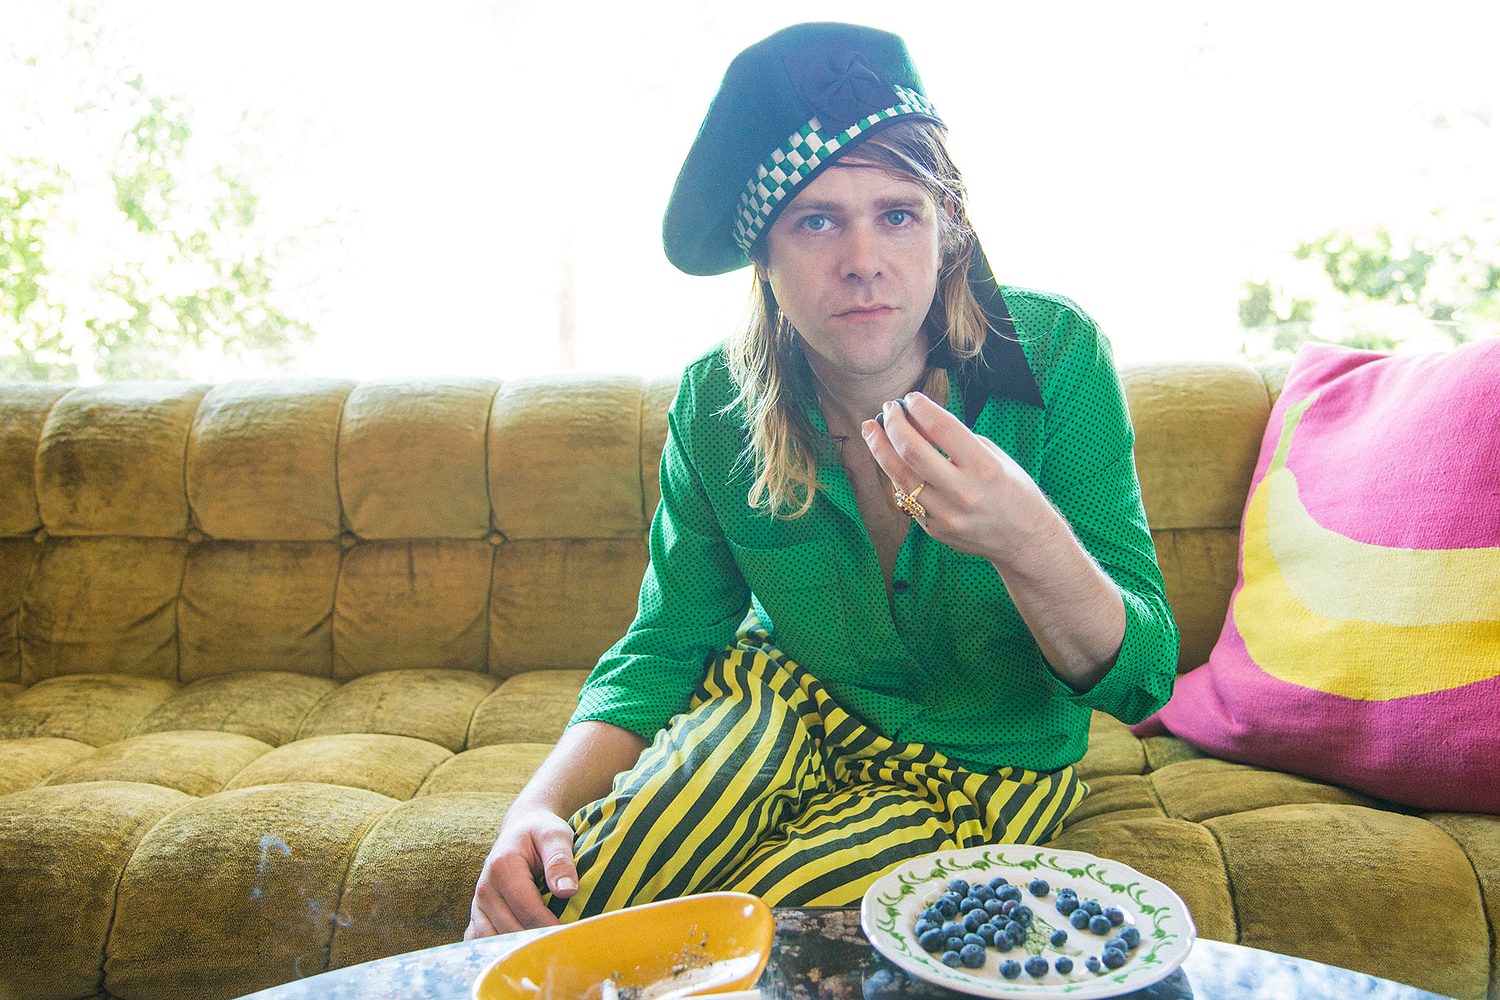 Ariel Pink: “I just want people to love me”